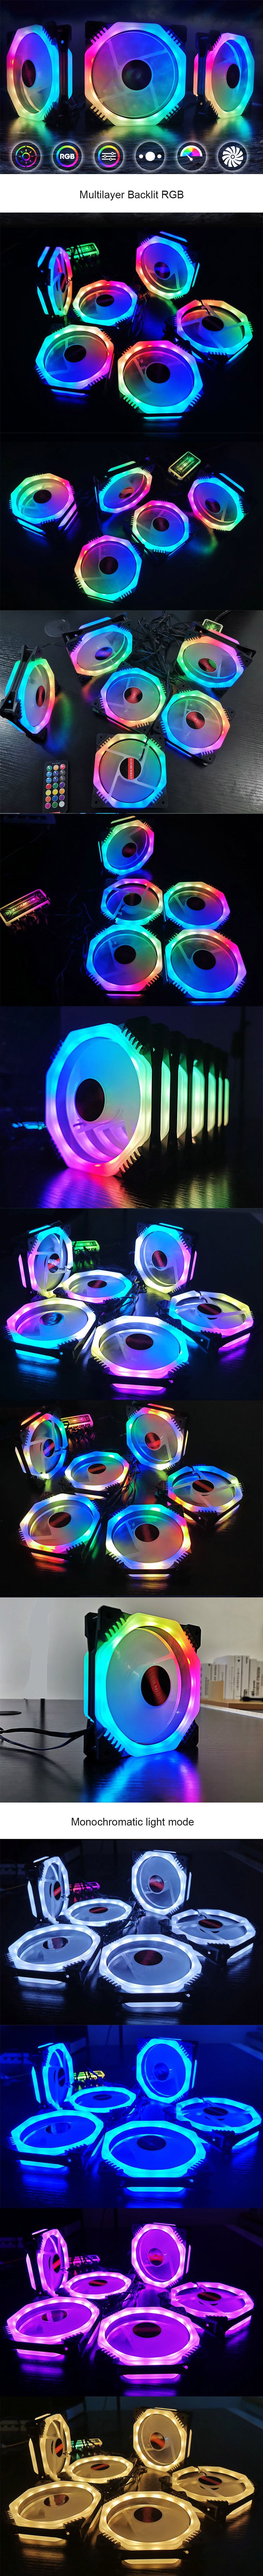 Coolmoon-6PCS-120mm-Multilayer-Backlit-RGB-Cooling-Fan-Computer-Case-PC-CPU-Cooling-Fan-with-the-Rem-1580142